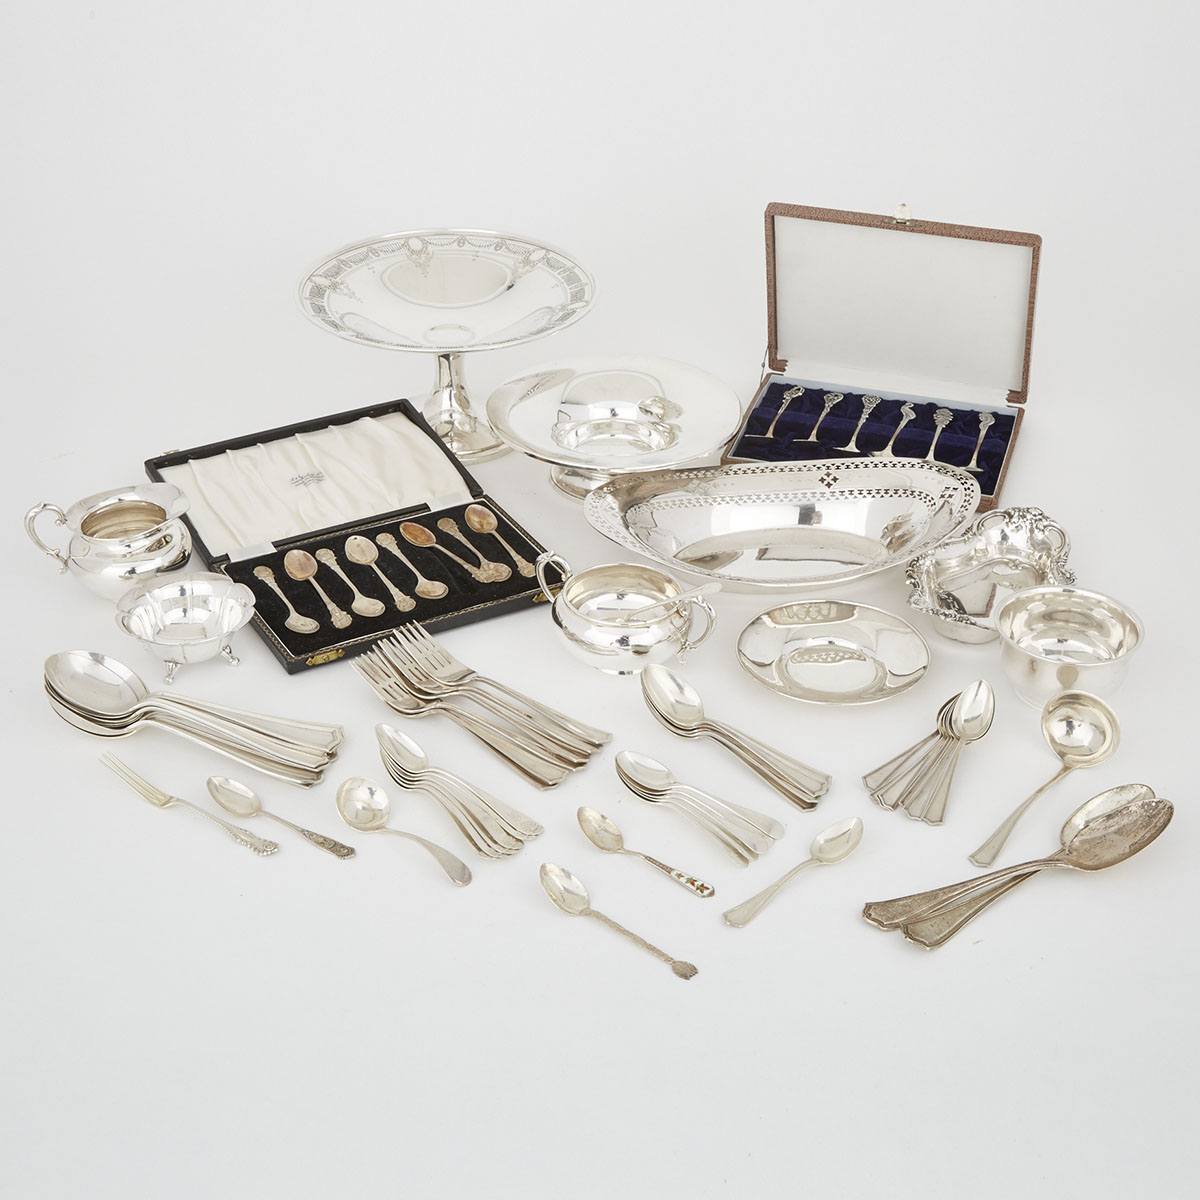 Group of North American, English and Japanese Silver, 20th century